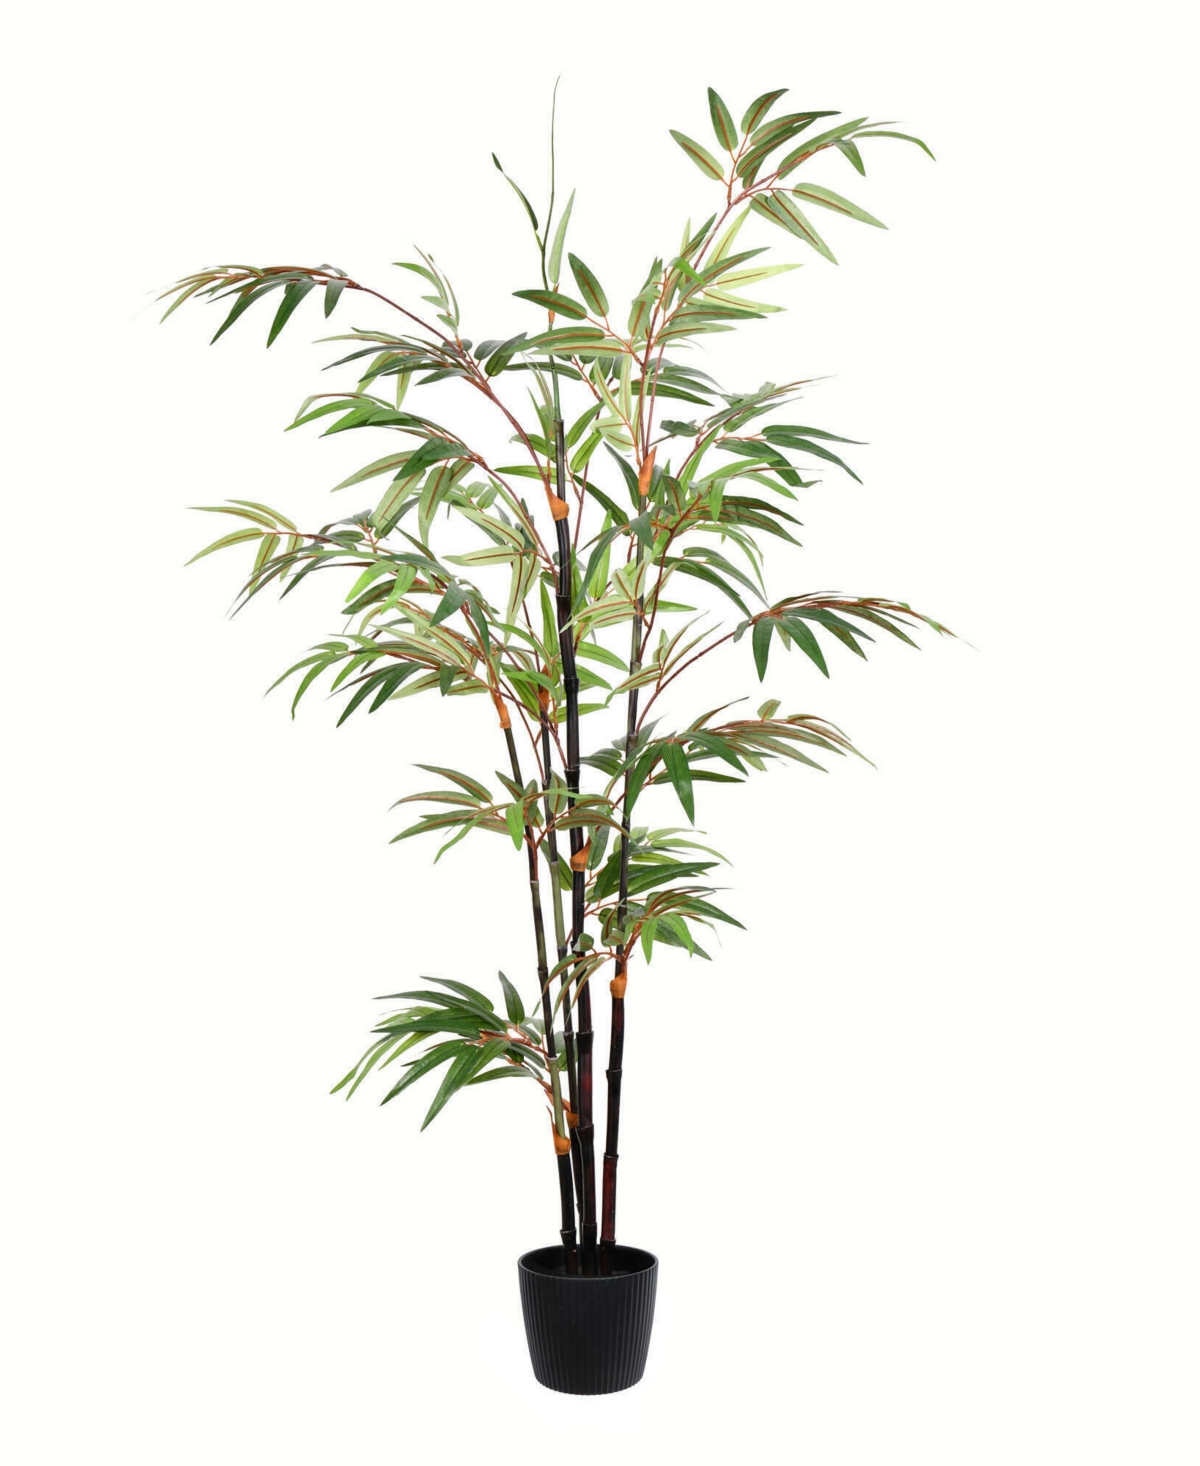 4' Artificial Potted Black Japanese Bamboo Tree - Green